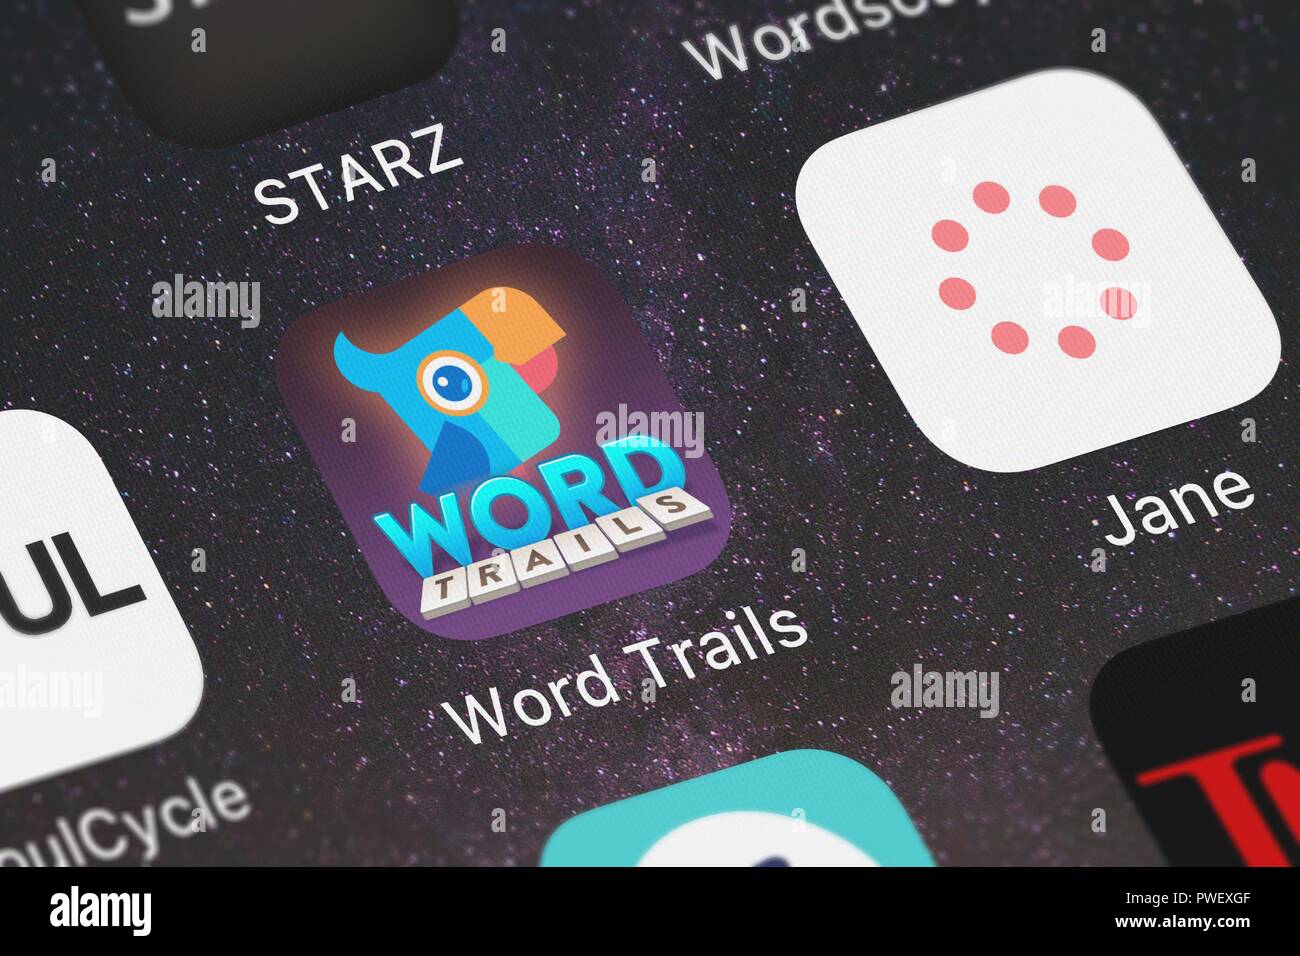 London, United Kingdom - October 15, 2018: Screenshot of the Word Trails mobile app from brainbow icon on an iPhone. Stock Photo